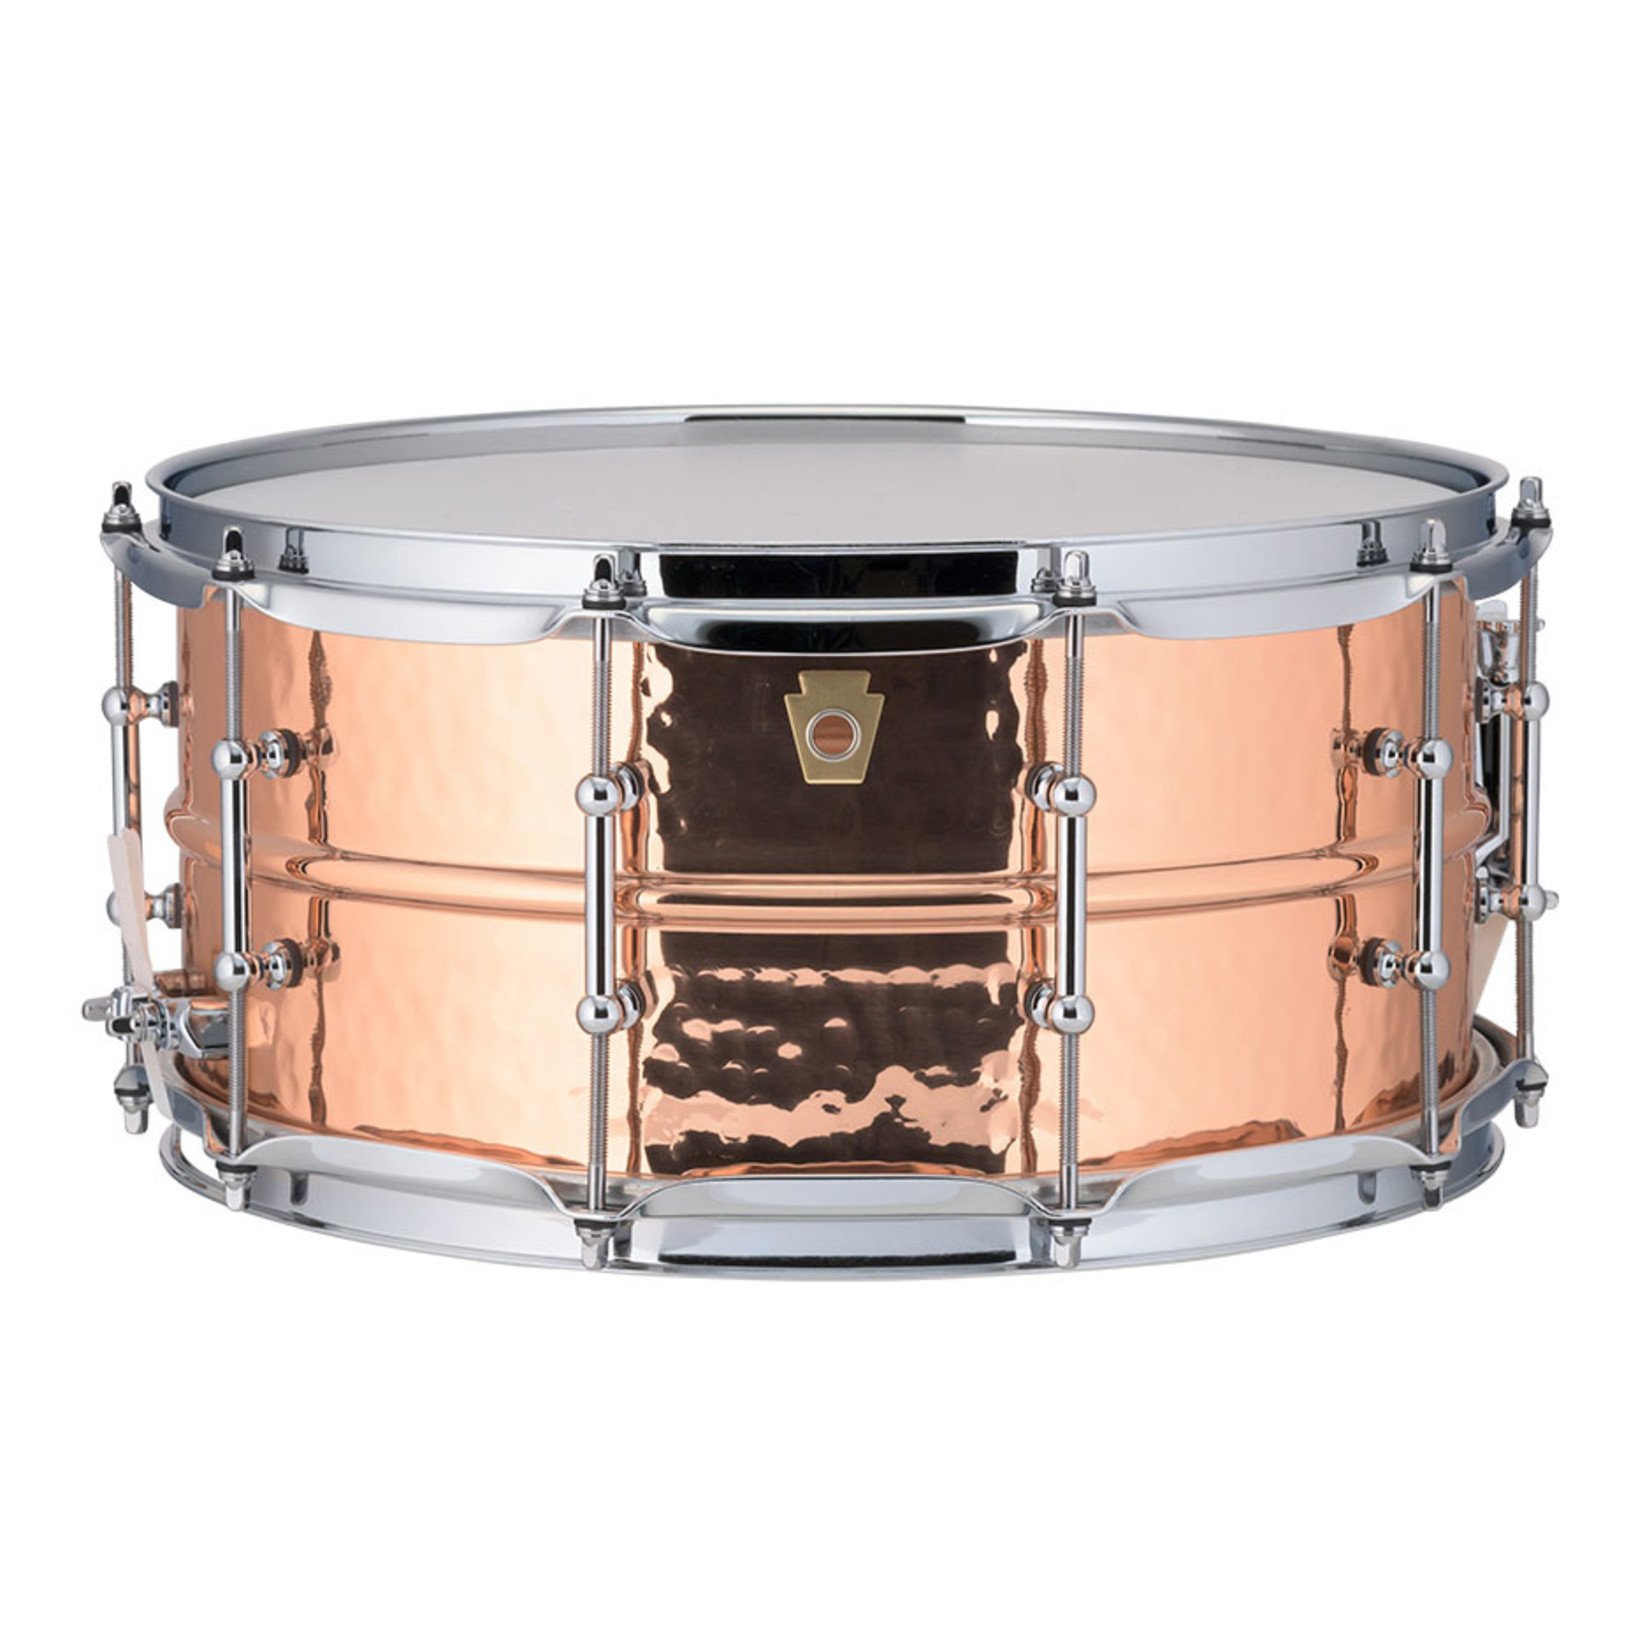 Ludwig Ludwig 6.5X14 Copper Phonic Snare Drum / TubeLugs / Hammered Shell